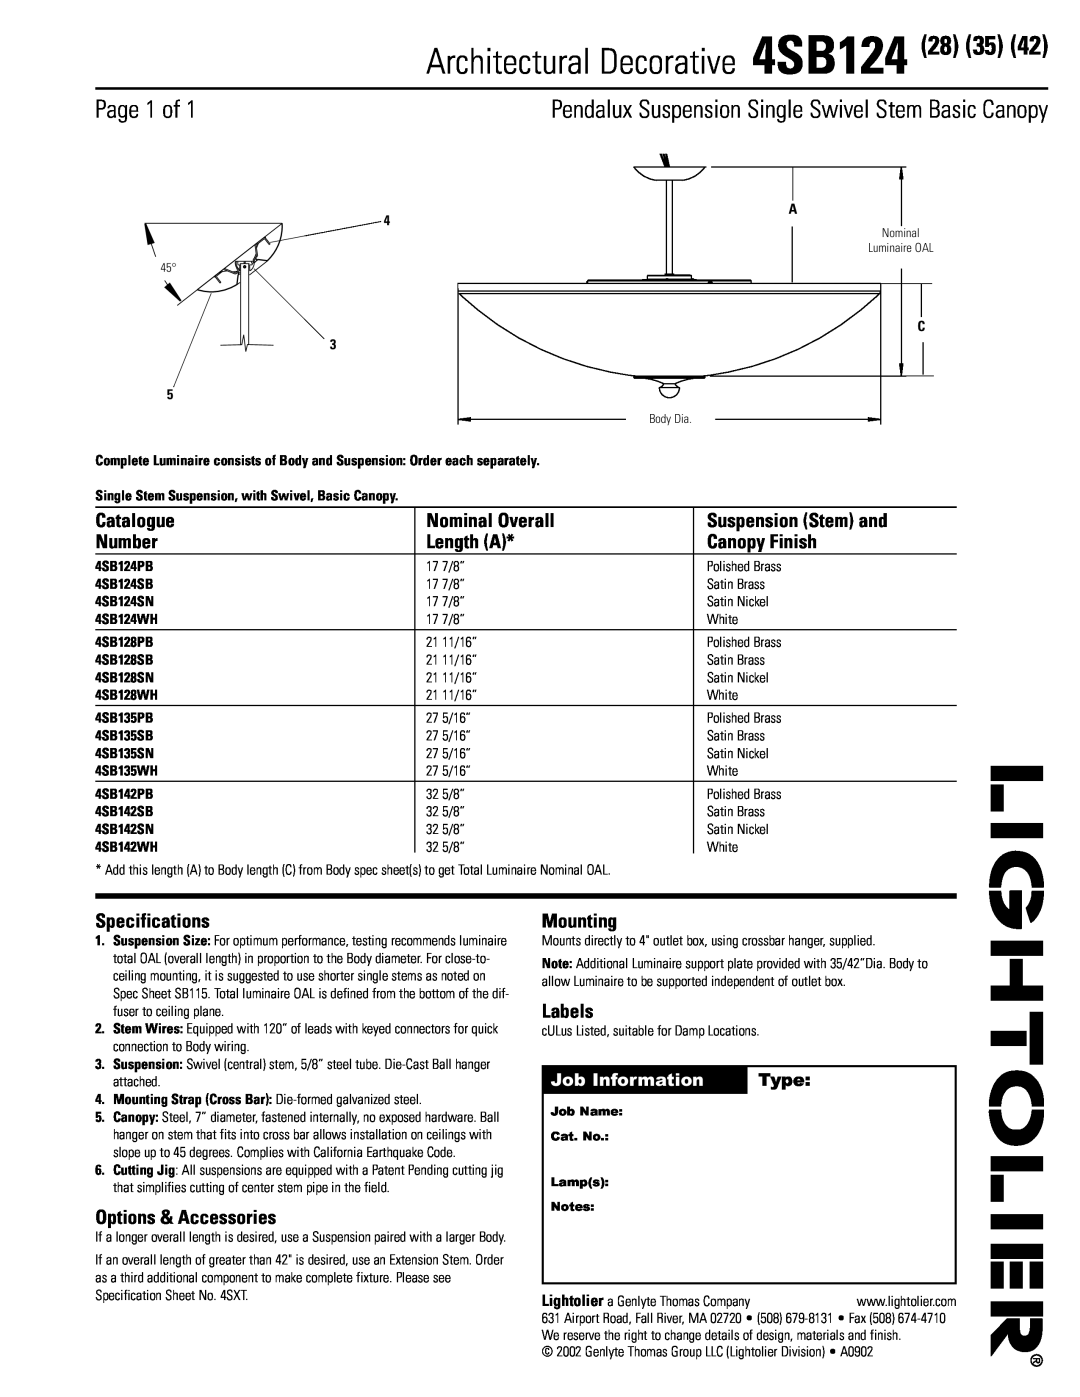 Lightolier specifications Architectural Decorative 4SB124, Page 1 of 